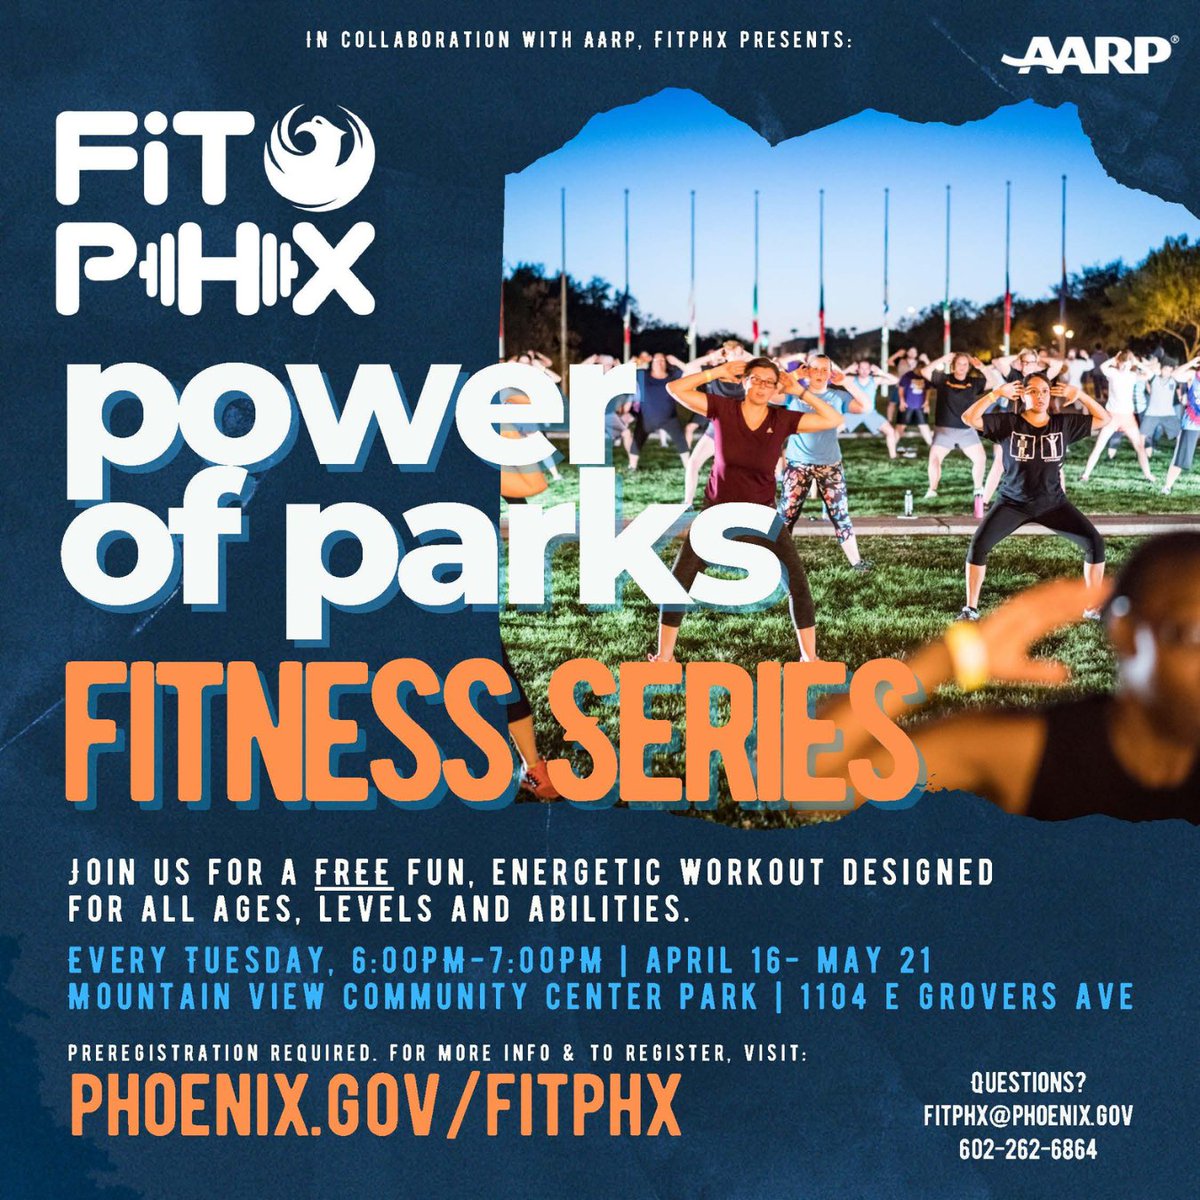 Sunset dance parties with FitPHX every TUESDAY! Join our FREE, weekly dance-based fitness classes at Mountain View Community Center Park. 📝 Register: phoenix.gov/fitphx 📍 1104 E Grovers Ave 🗓️ EVERY TUESDAY, 6:00-7:00PM This program is presented thanks to AARP Arizona.